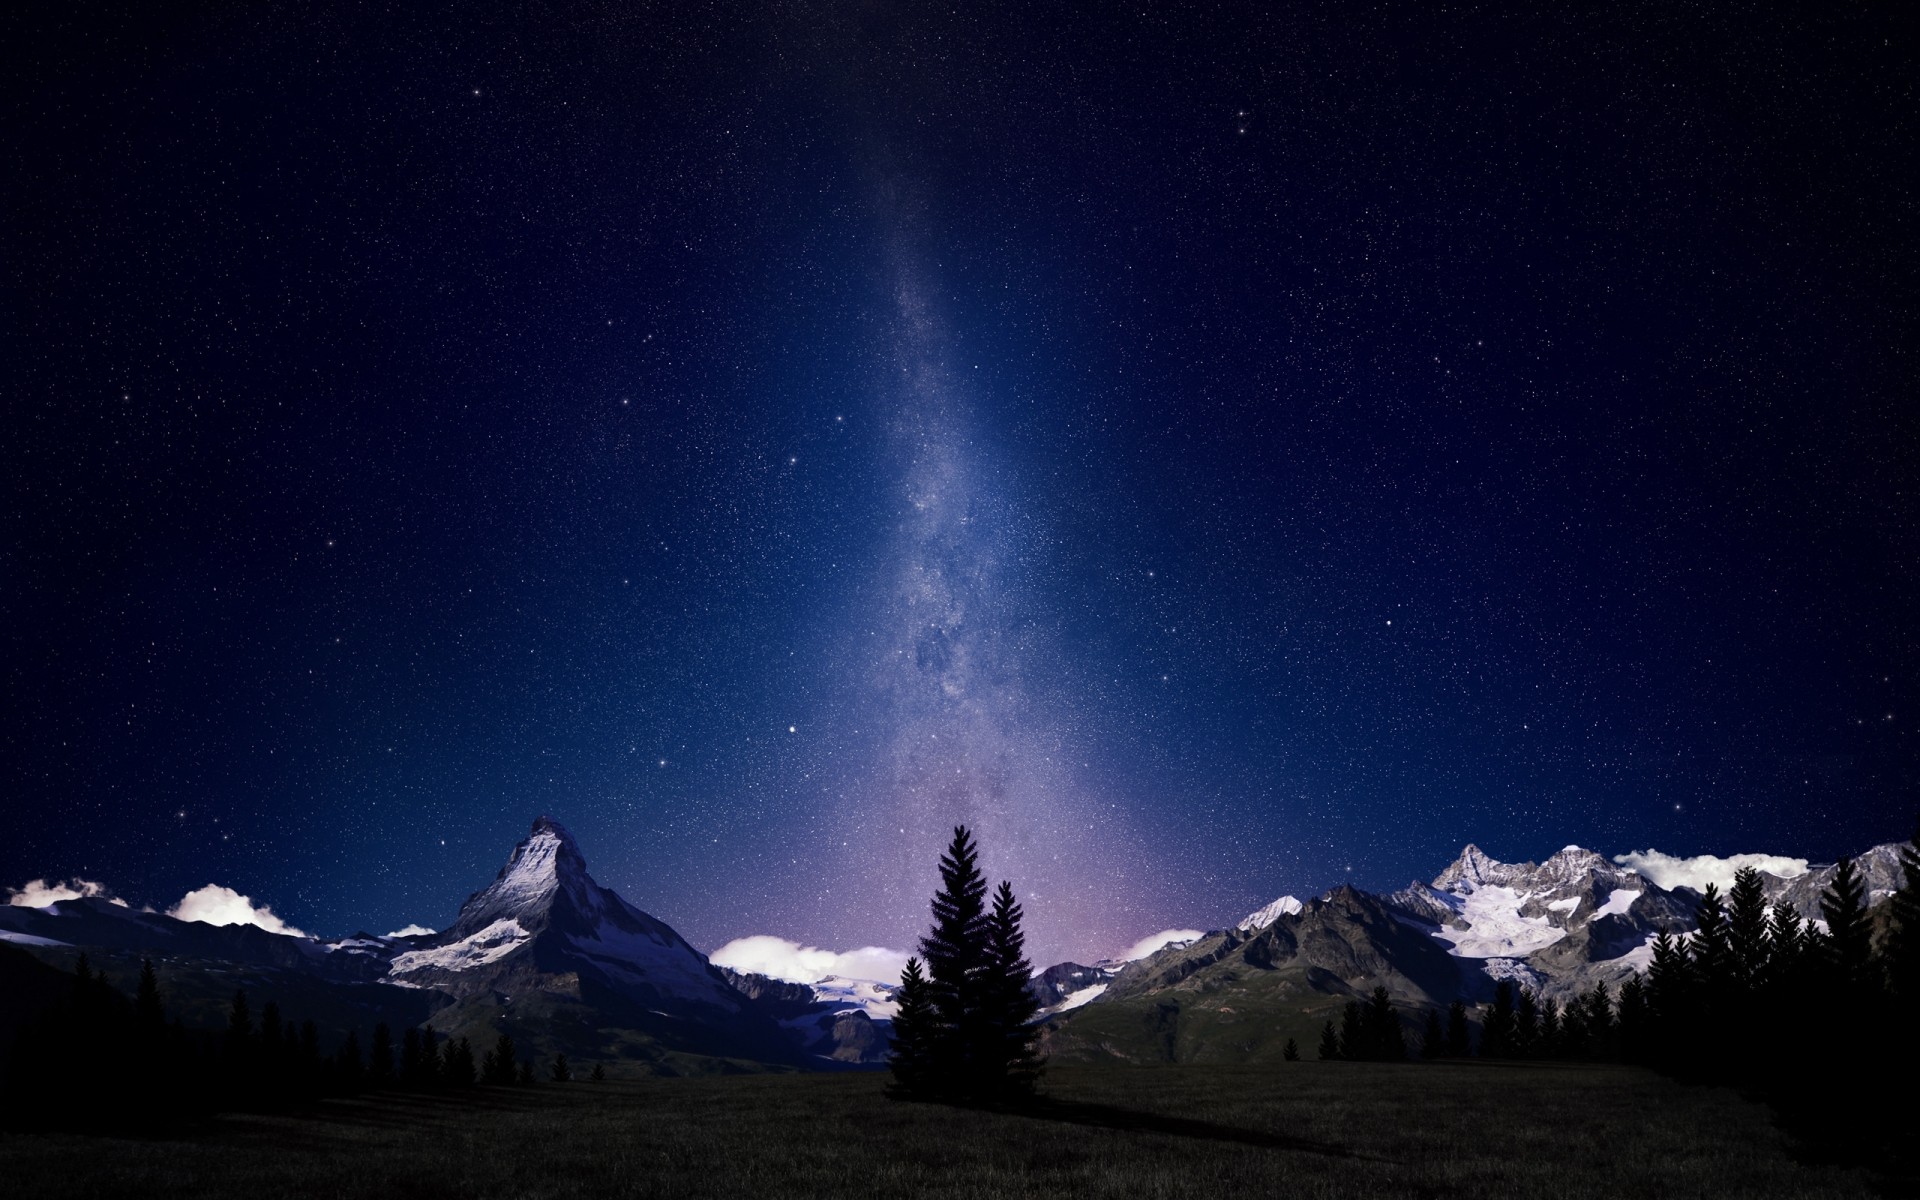 landscapes snow mountain moon sky landscape winter astronomy outdoors travel nature dawn exploration evening light daylight ice sunset scenic space stars trees